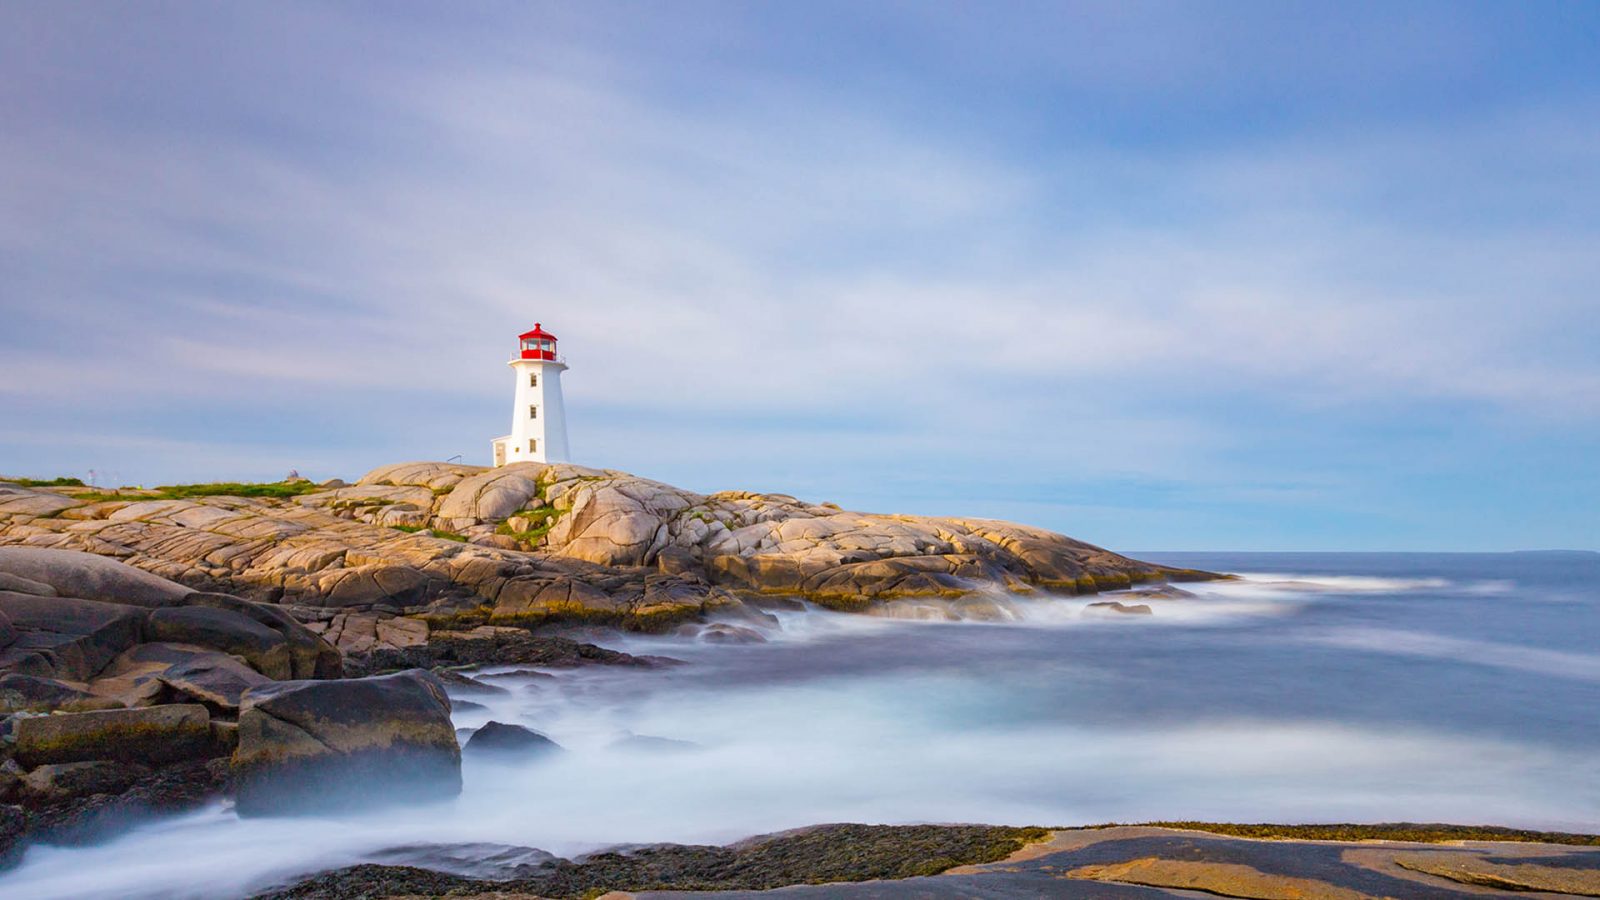 Do You Have the Smarts to Pass This World Geography Quiz With Flying Colors 🌈? Peggys Point Lighthouse, Peggy's Cove, Nova Scotia, Canada